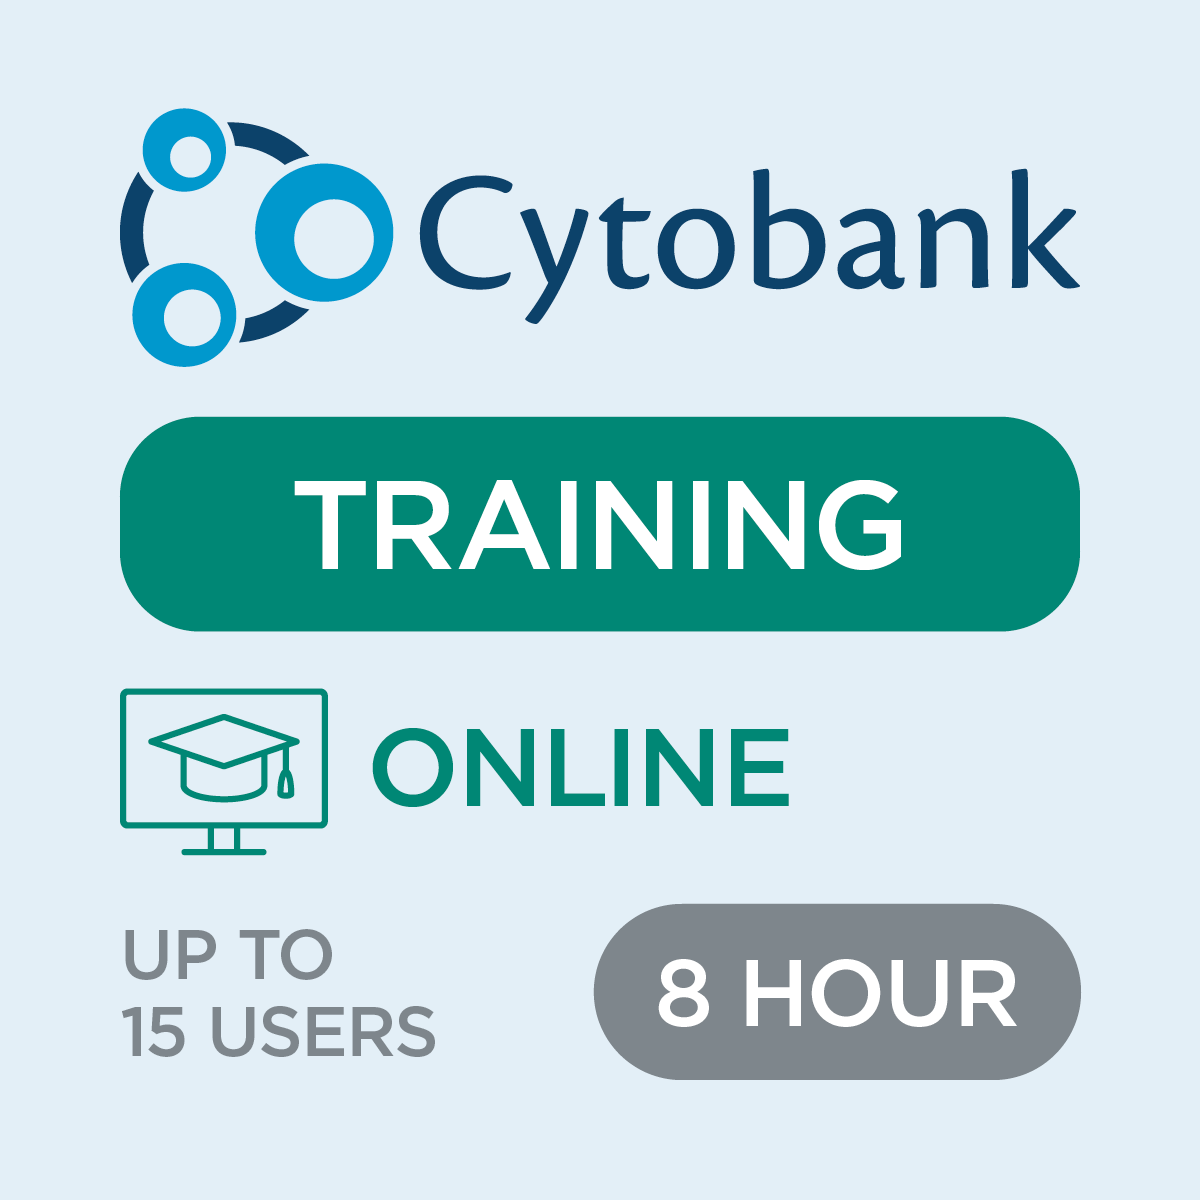 c47409, Online Cytobank Training, Up-to-15-users, 8-hour